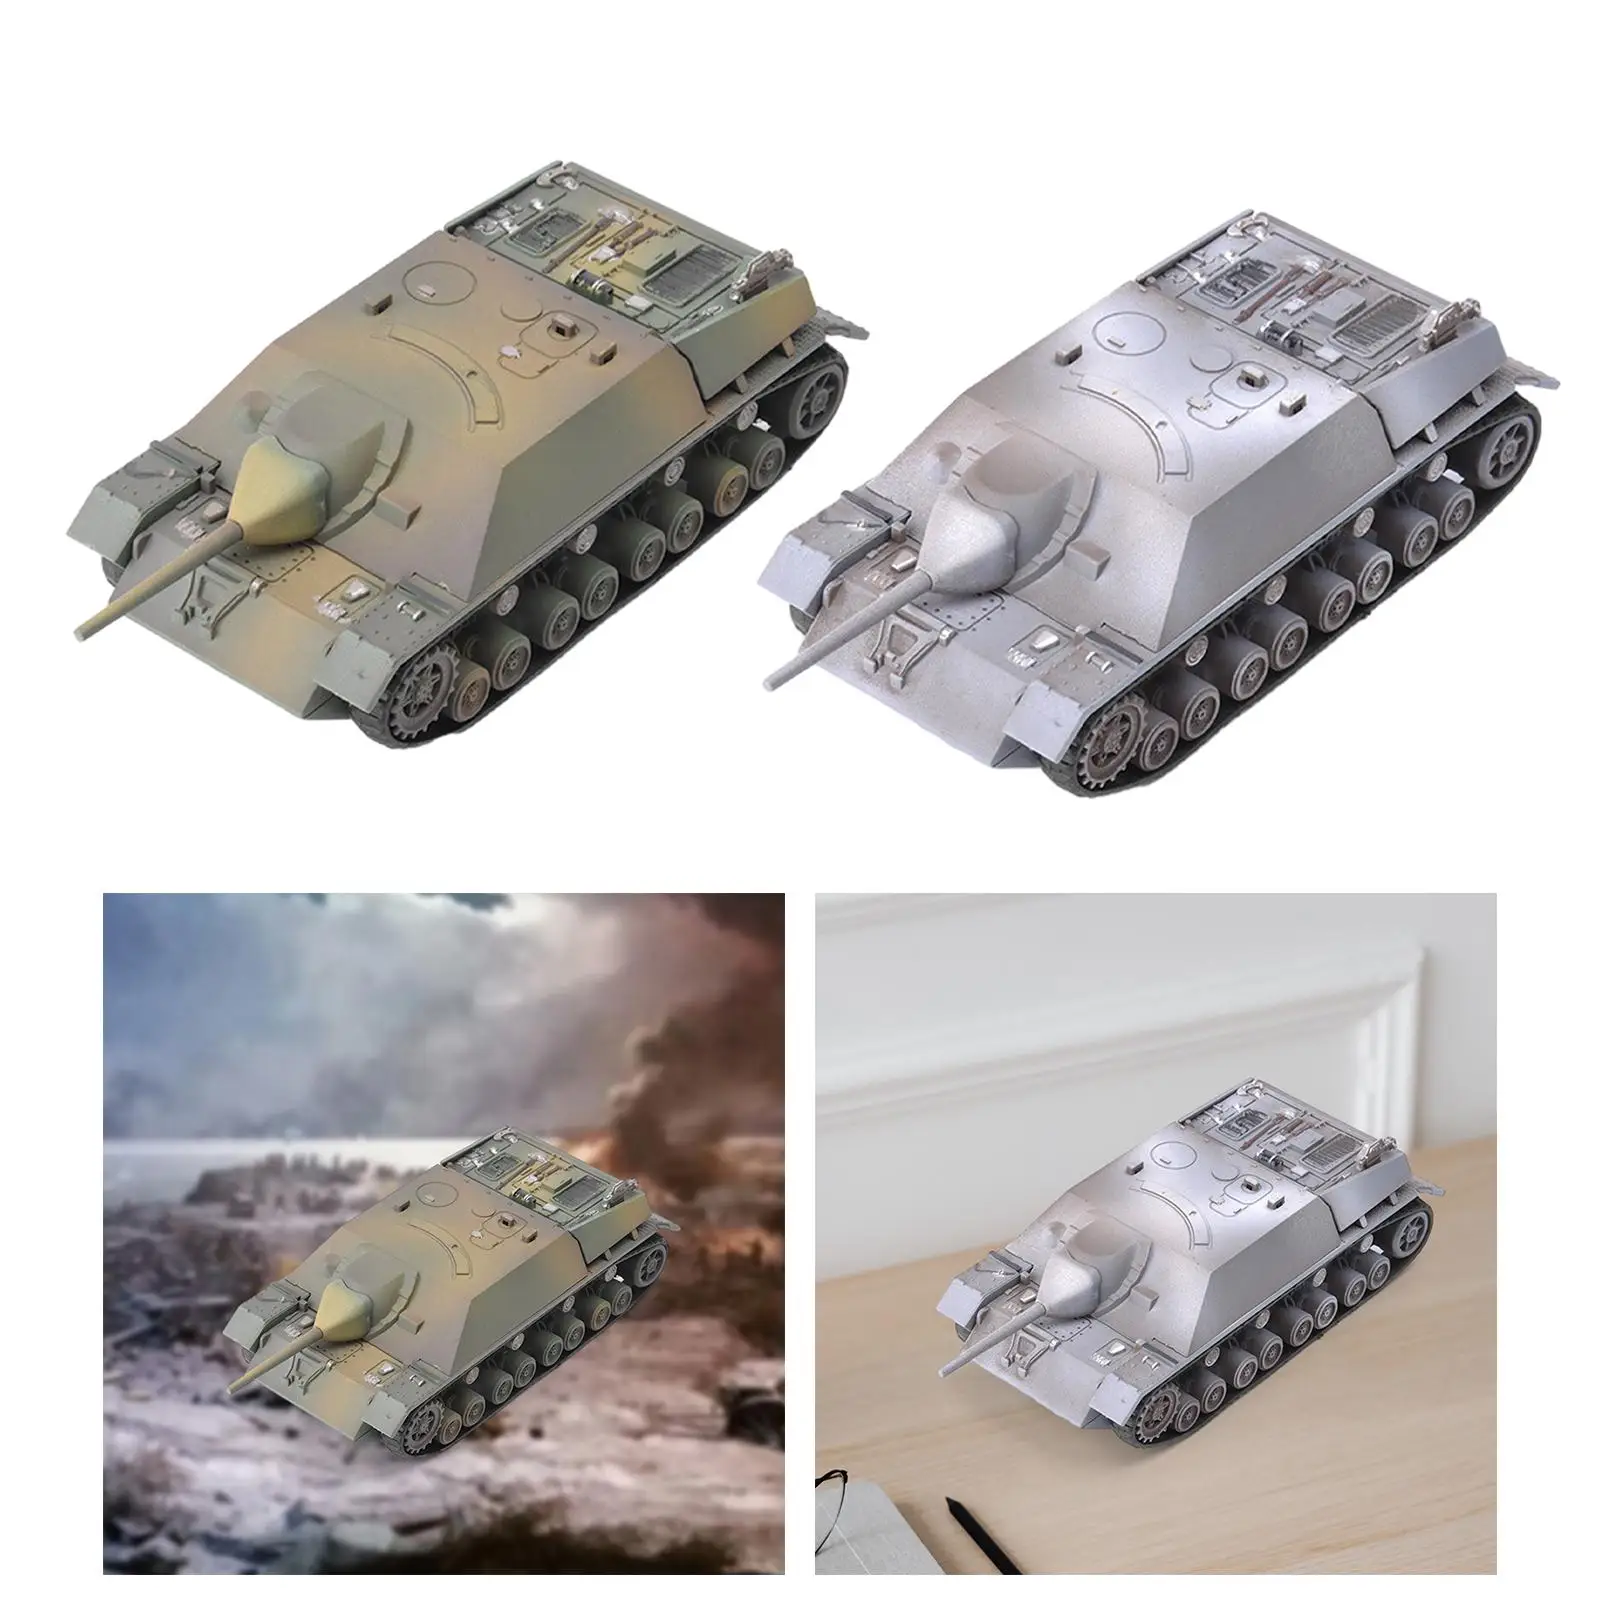 1/72 Tank Model Puzzle Vehicle Tank Model Toy DIY Assemble Collection Miniature Tank Building Kits for Boy Kids Birthday Gift